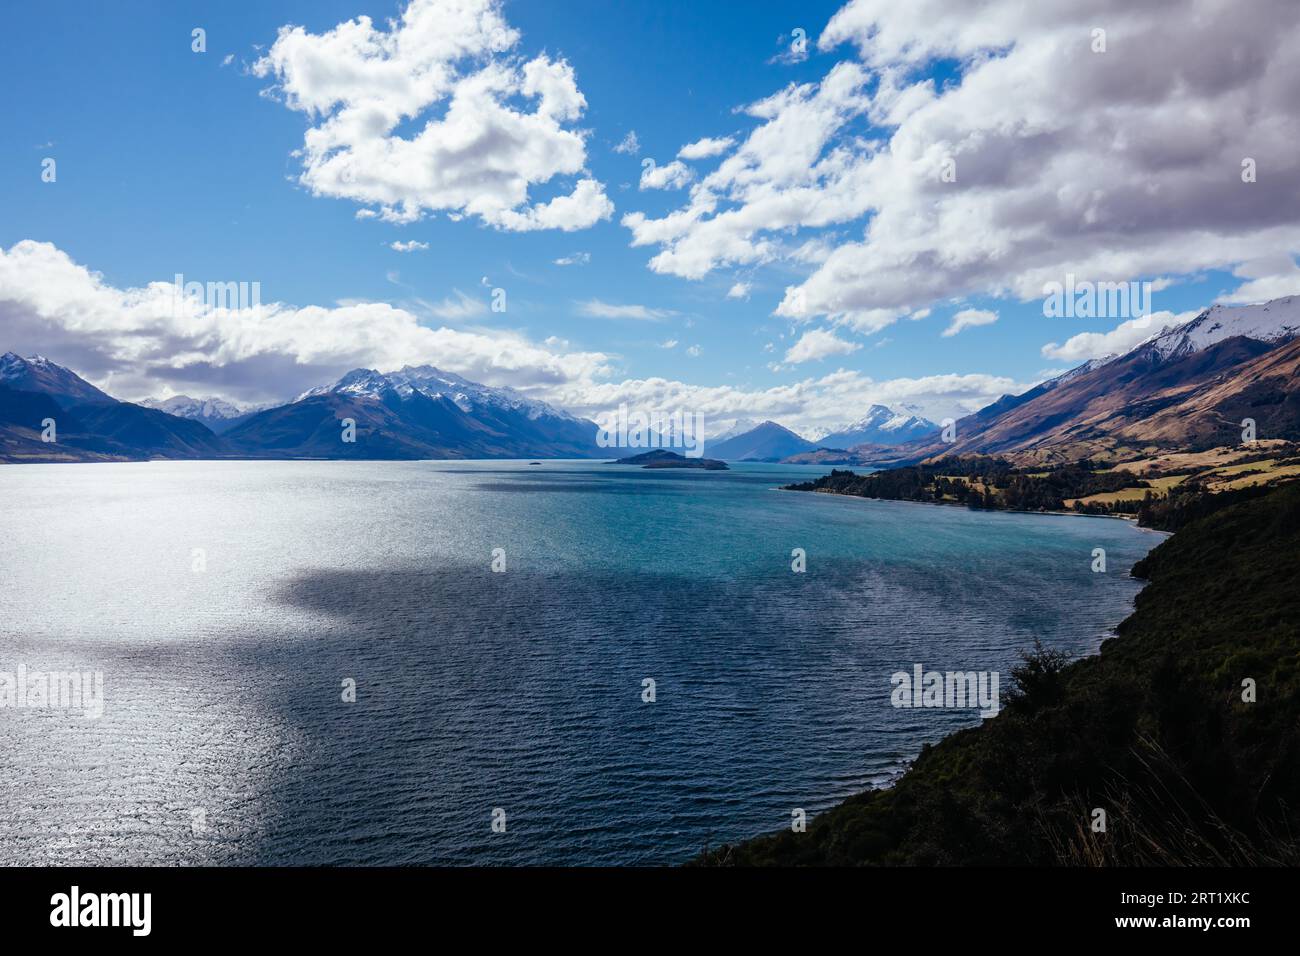 Lake Wakatipu and surrounding mountains from Bennetts Bluff Lookout, on a sunny spring day near Glenorchy in New Zealand Stock Photo